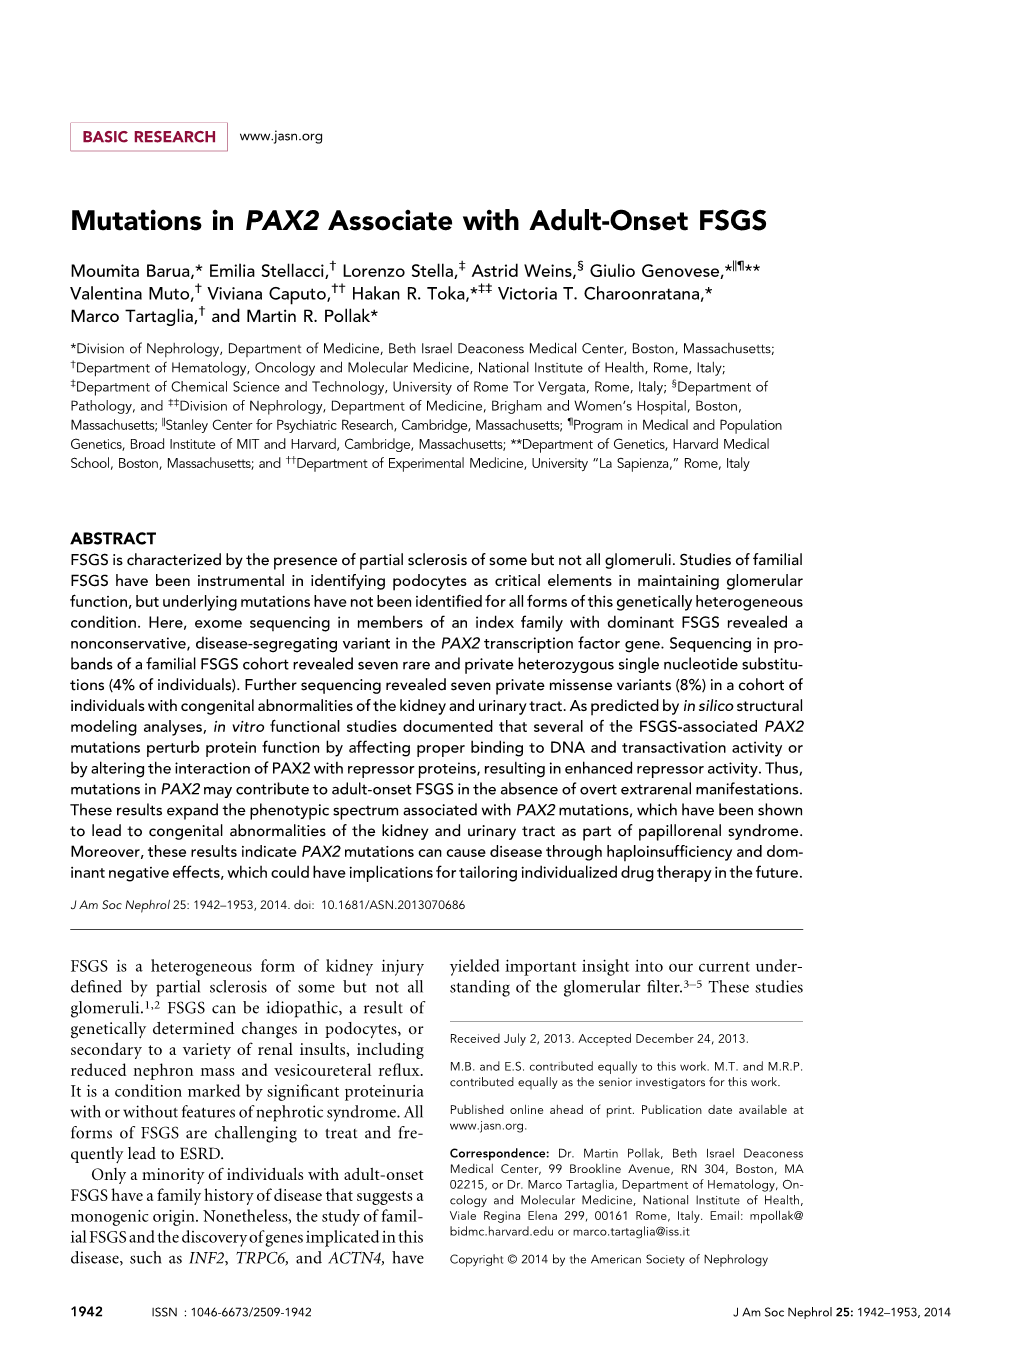 Mutations in PAX2 Associate with Adult-Onset FSGS